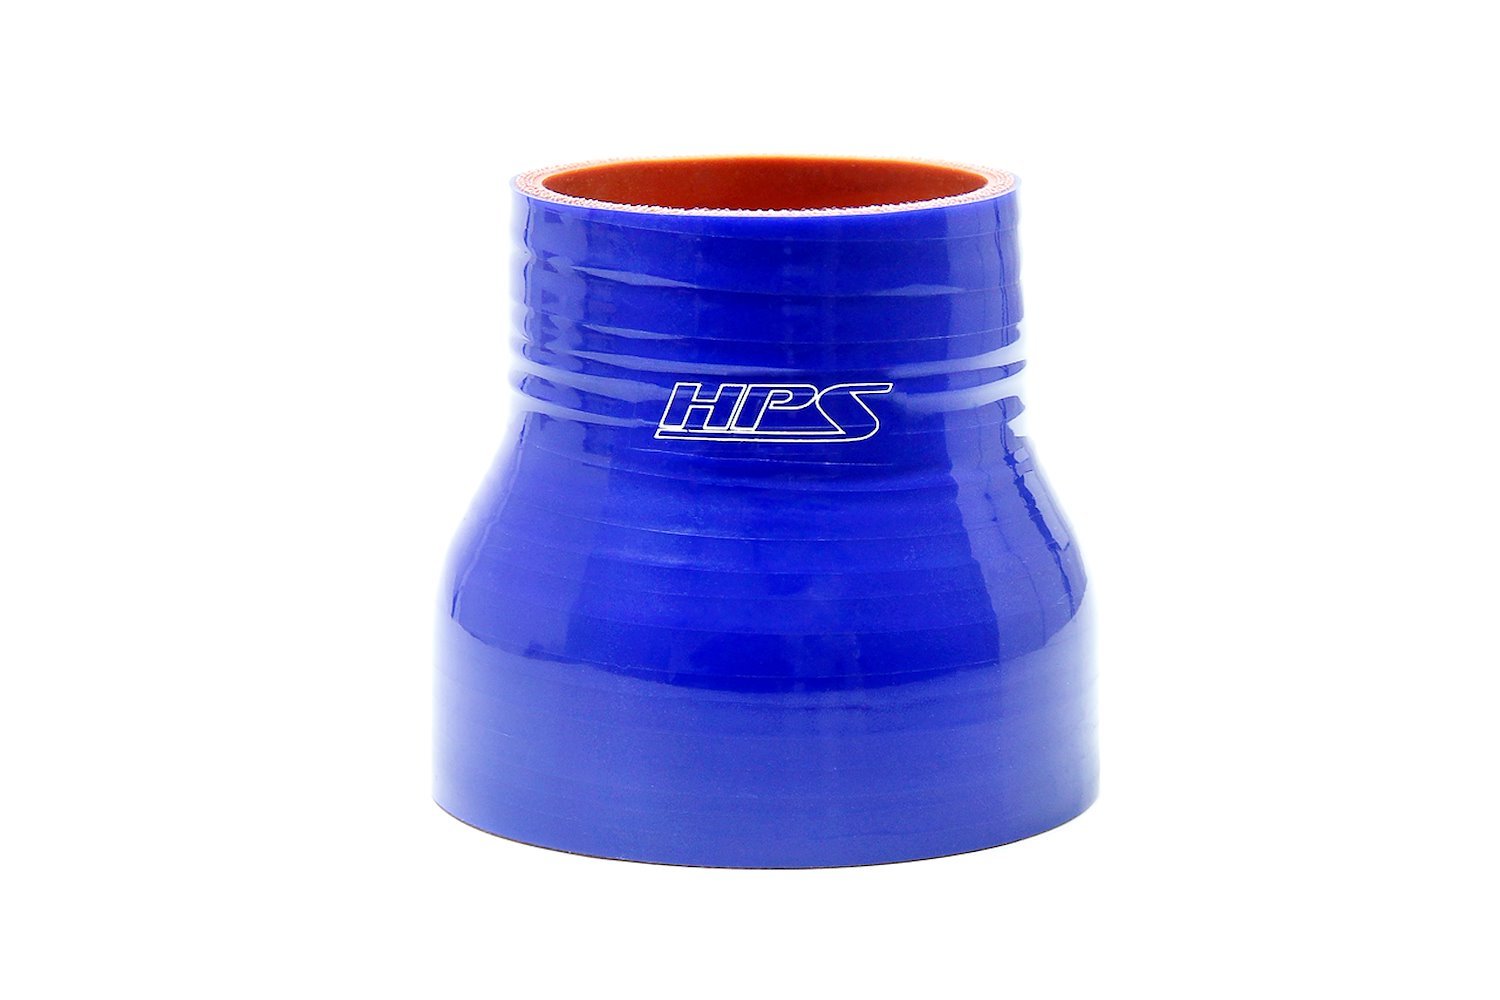 HTSR-150-250-BLUE Silicone Reducer Hose, High-Temp 4-Ply Reinforced, 1-1/2 in. - 2-1/2 in. ID, 3 in. Long, Blue